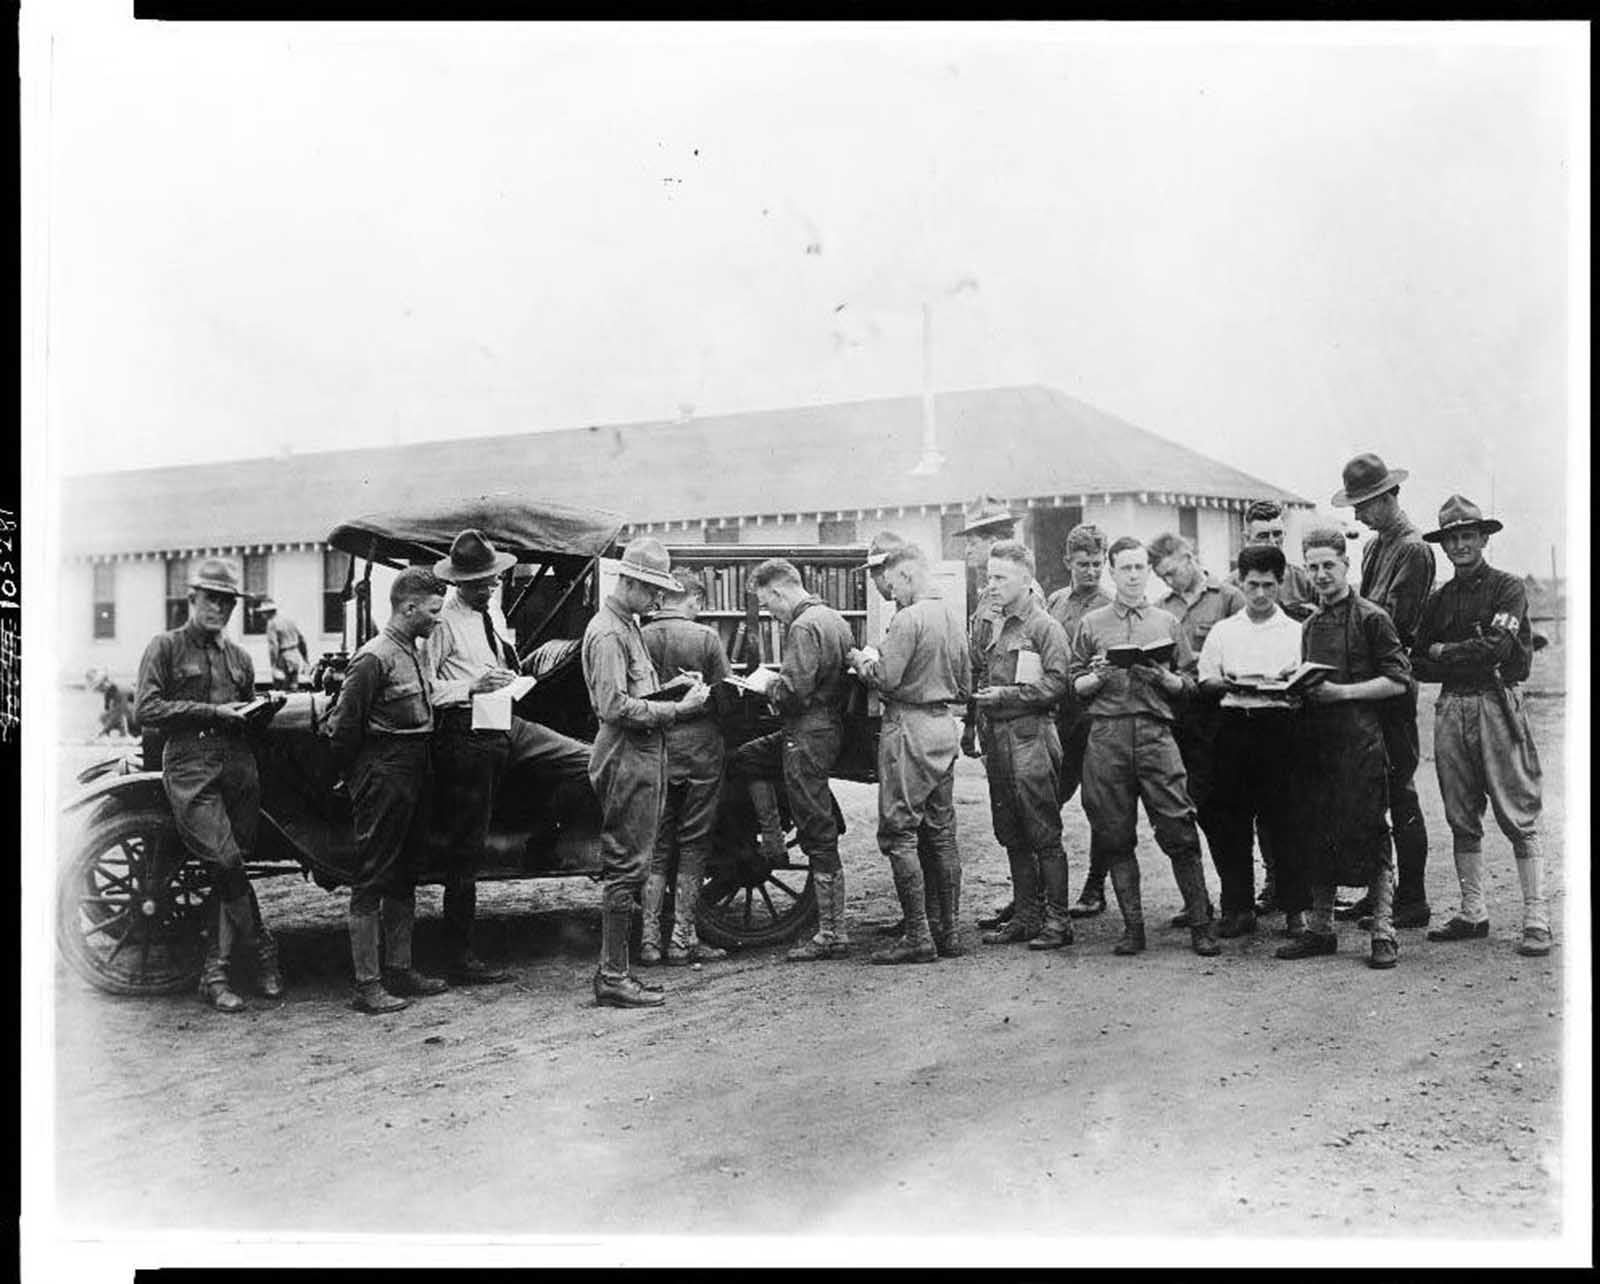 Soldiers getting library books from a truck, Kelly Field Library, Texas, c. 1917.